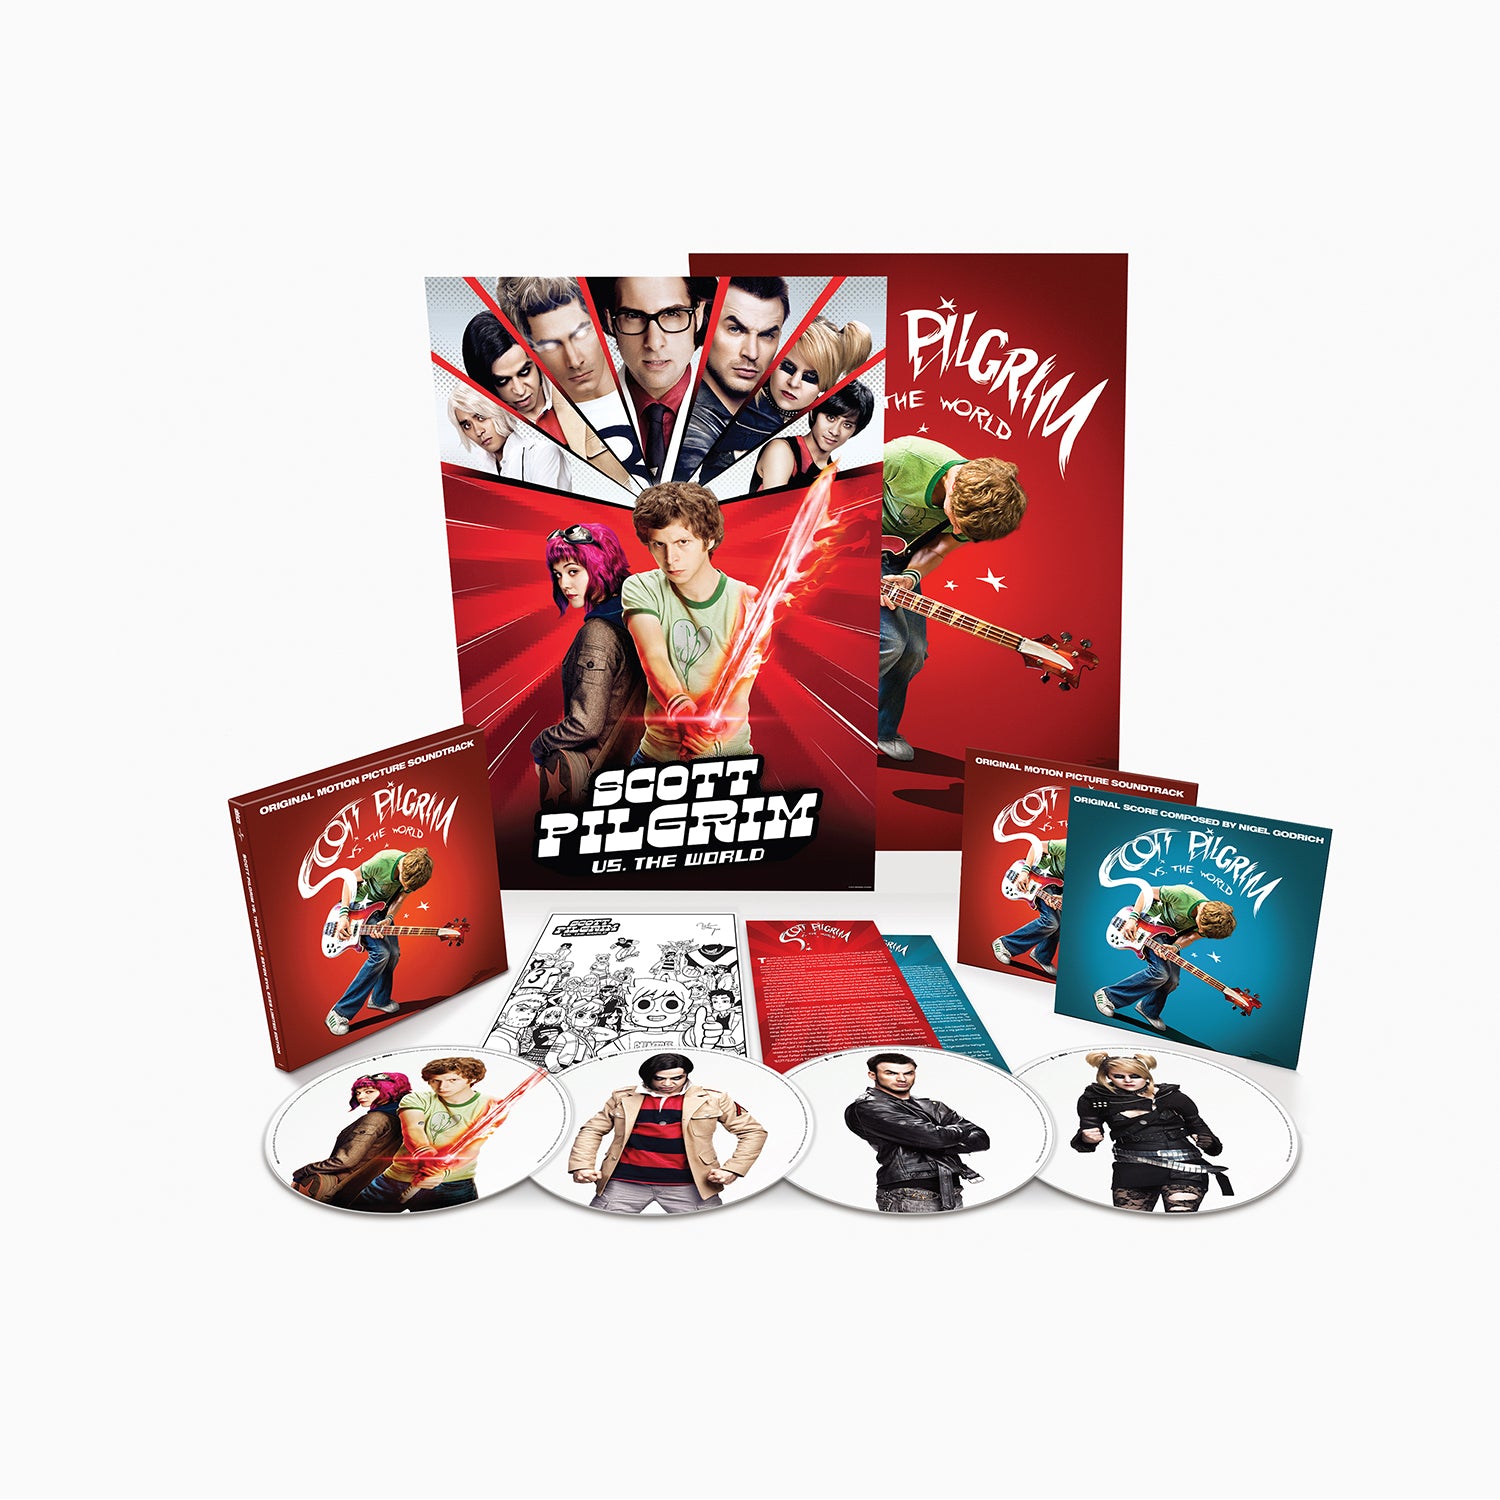 Scott Pilgrim vs. The World (Seven Evil Exes Edition) â€“ ABKCO Music and  Records Official Store